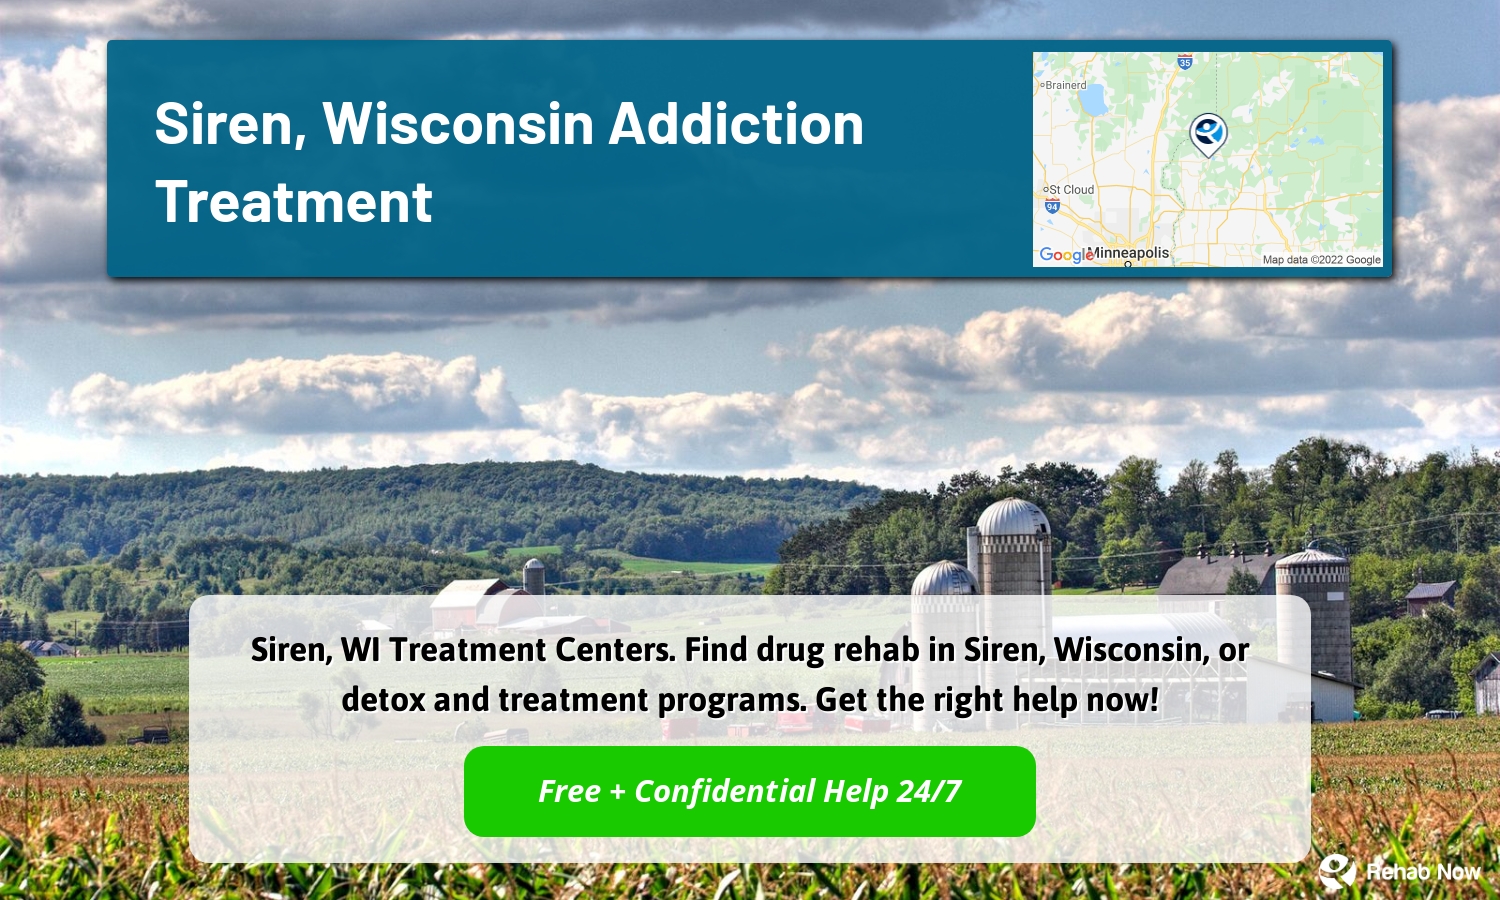 Siren, WI Treatment Centers. Find drug rehab in Siren, Wisconsin, or detox and treatment programs. Get the right help now!